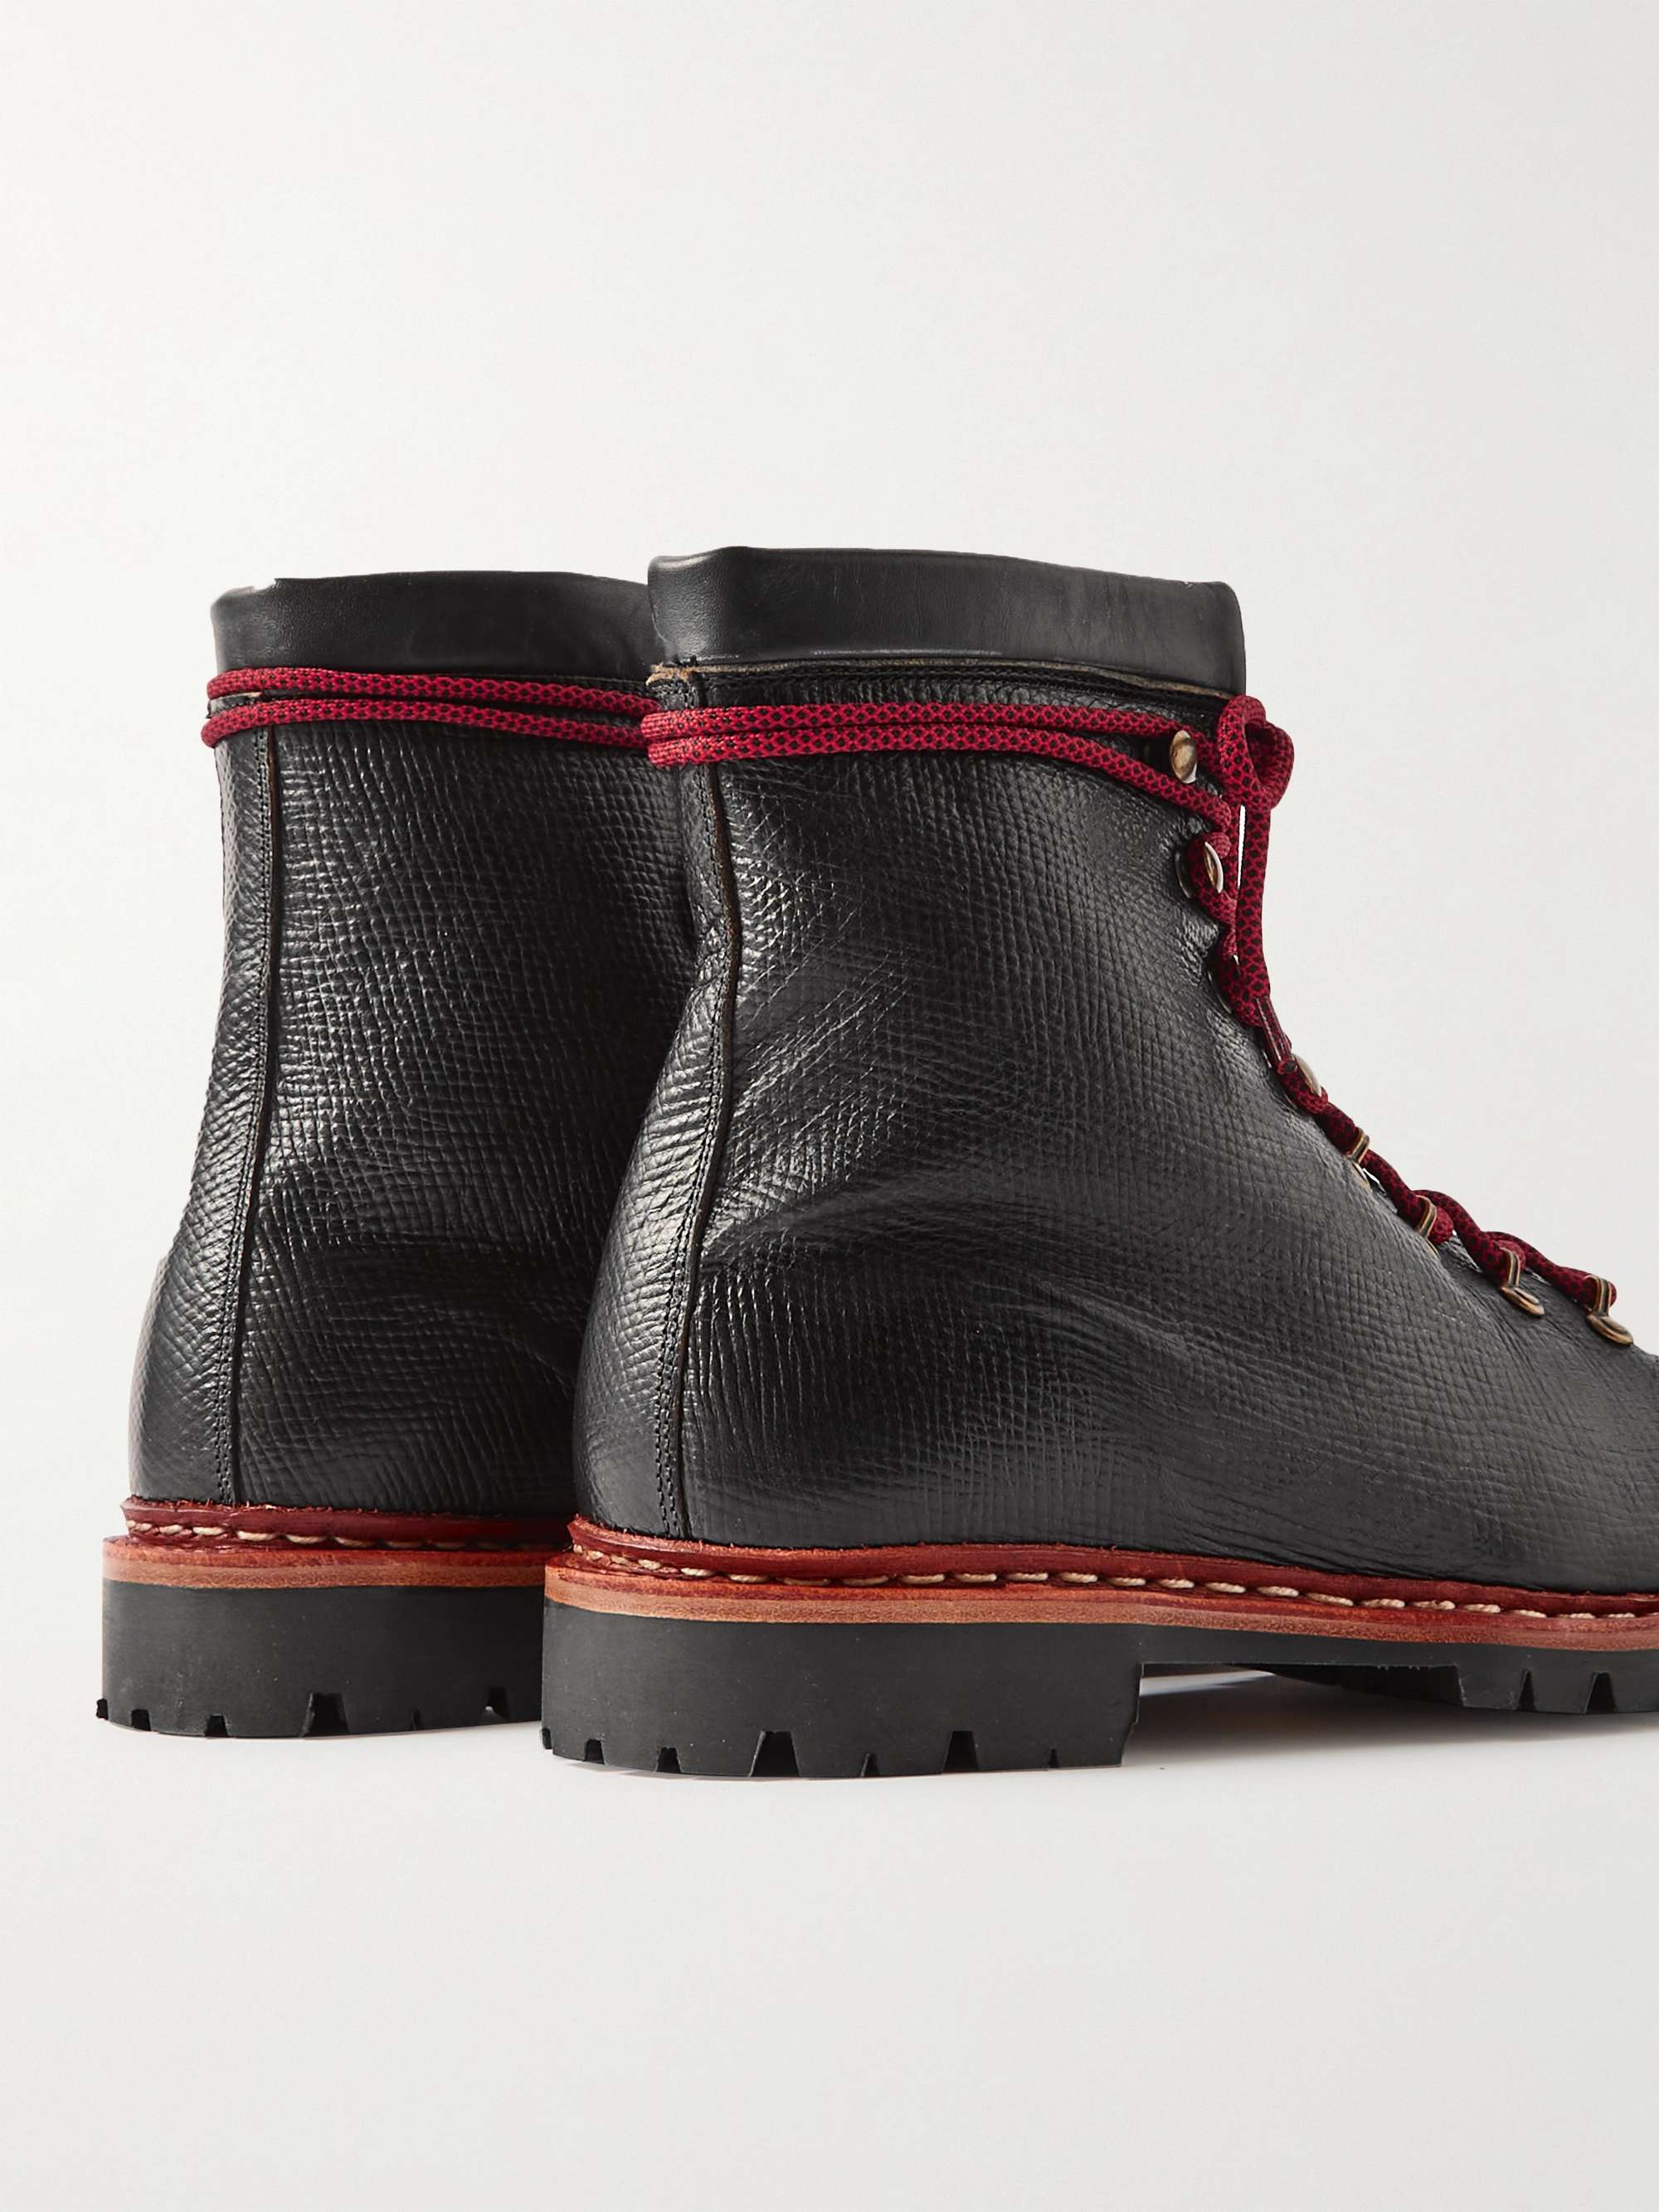 GEORGE CLEVERLEY Ernest Shearling-Lined Cross-Grain Leather Lace-Up Boots